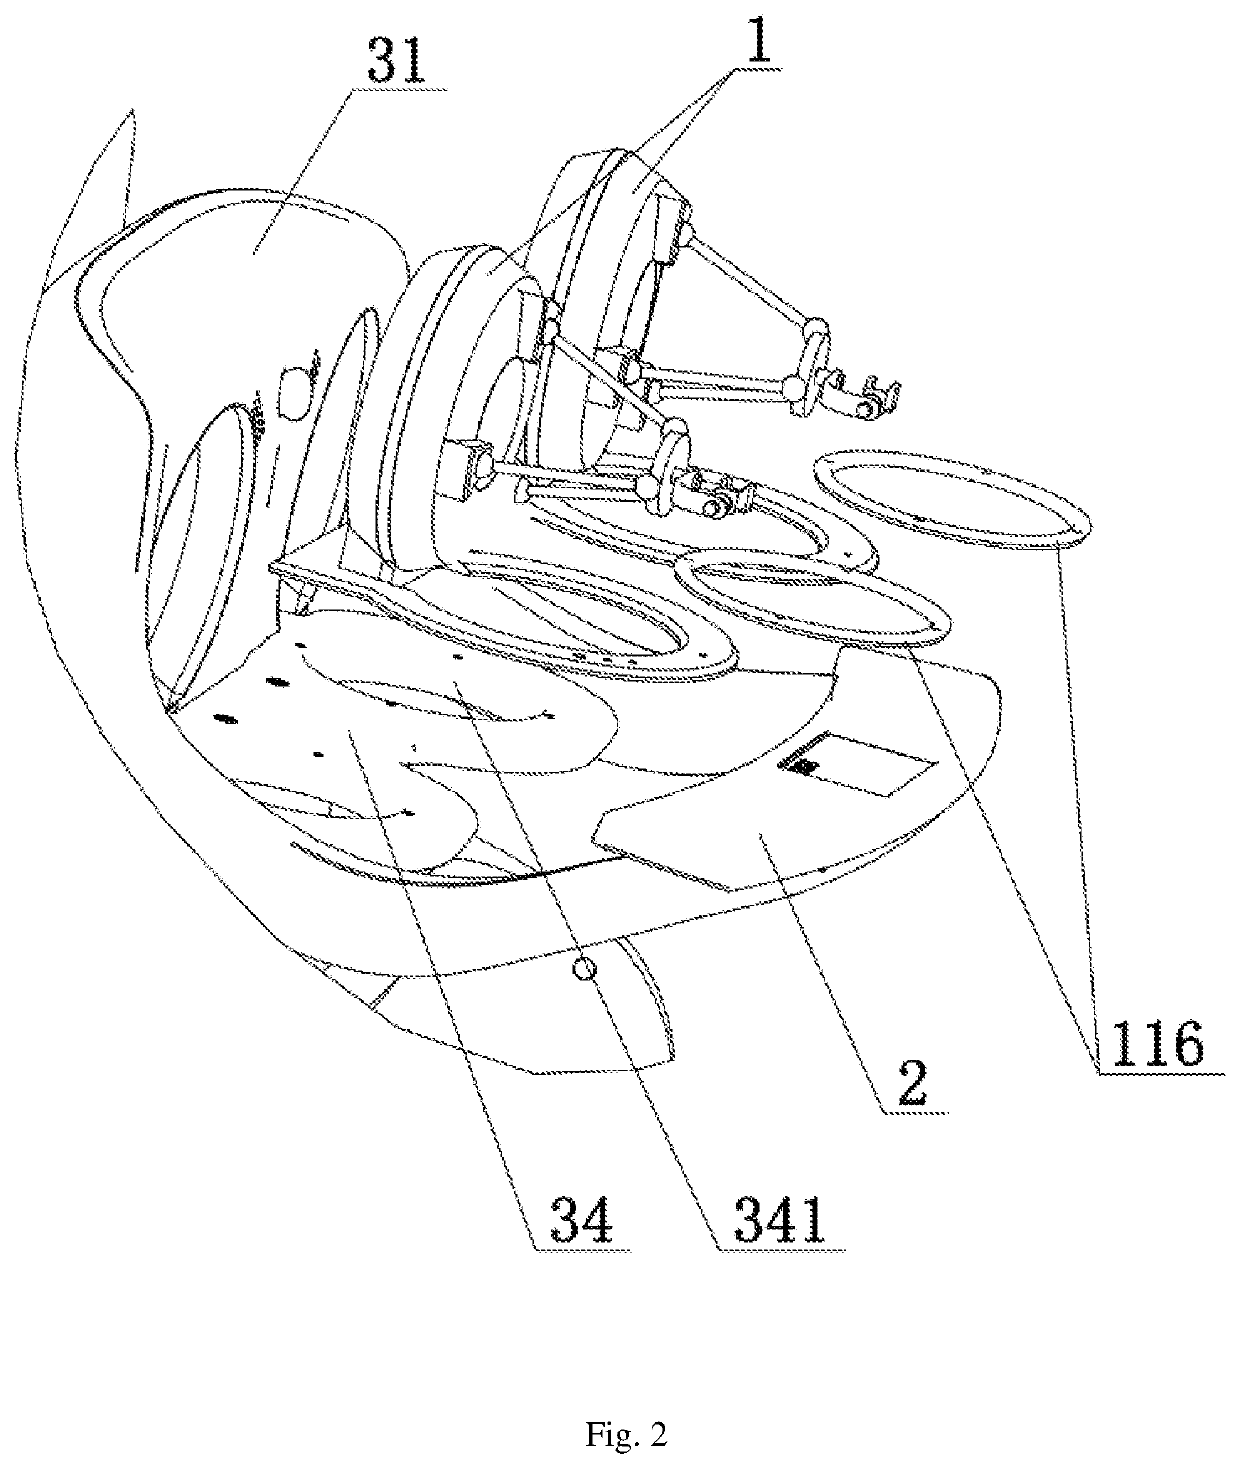 Console for operating actuating mechanism